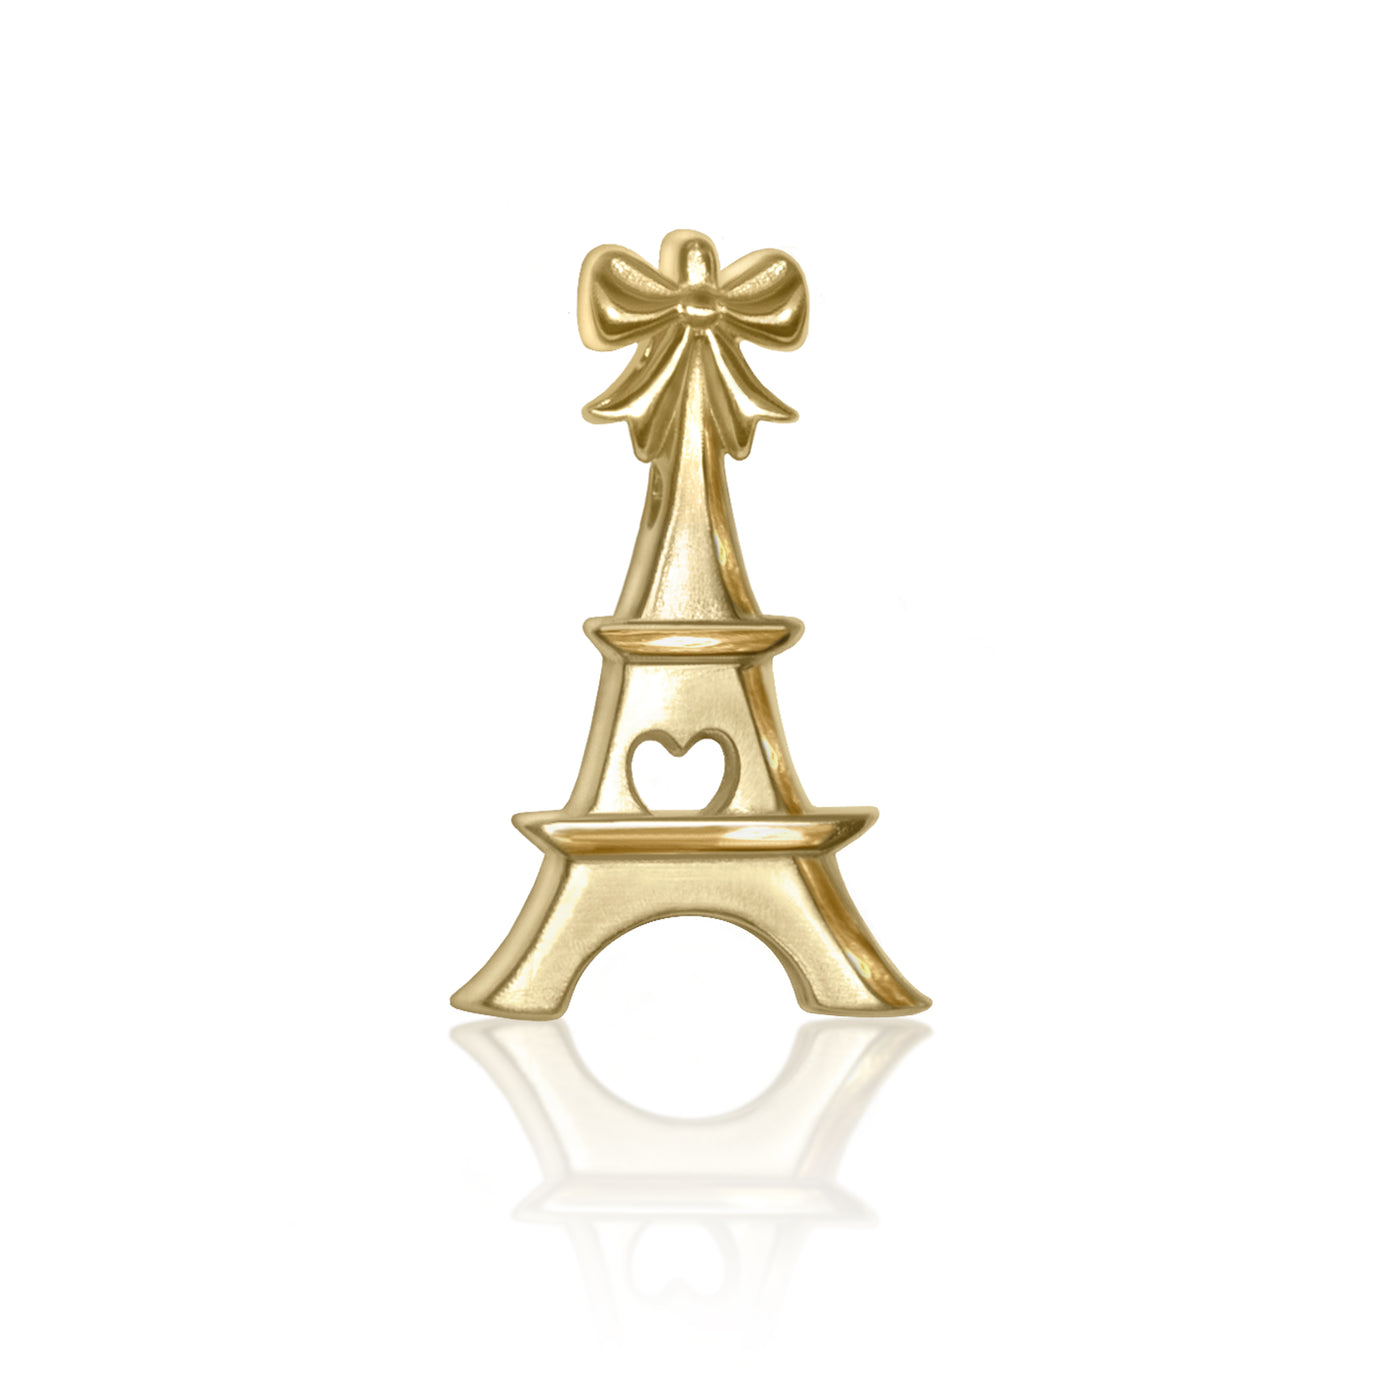 Alex Woo Cities Eiffel Tower Charm Necklace